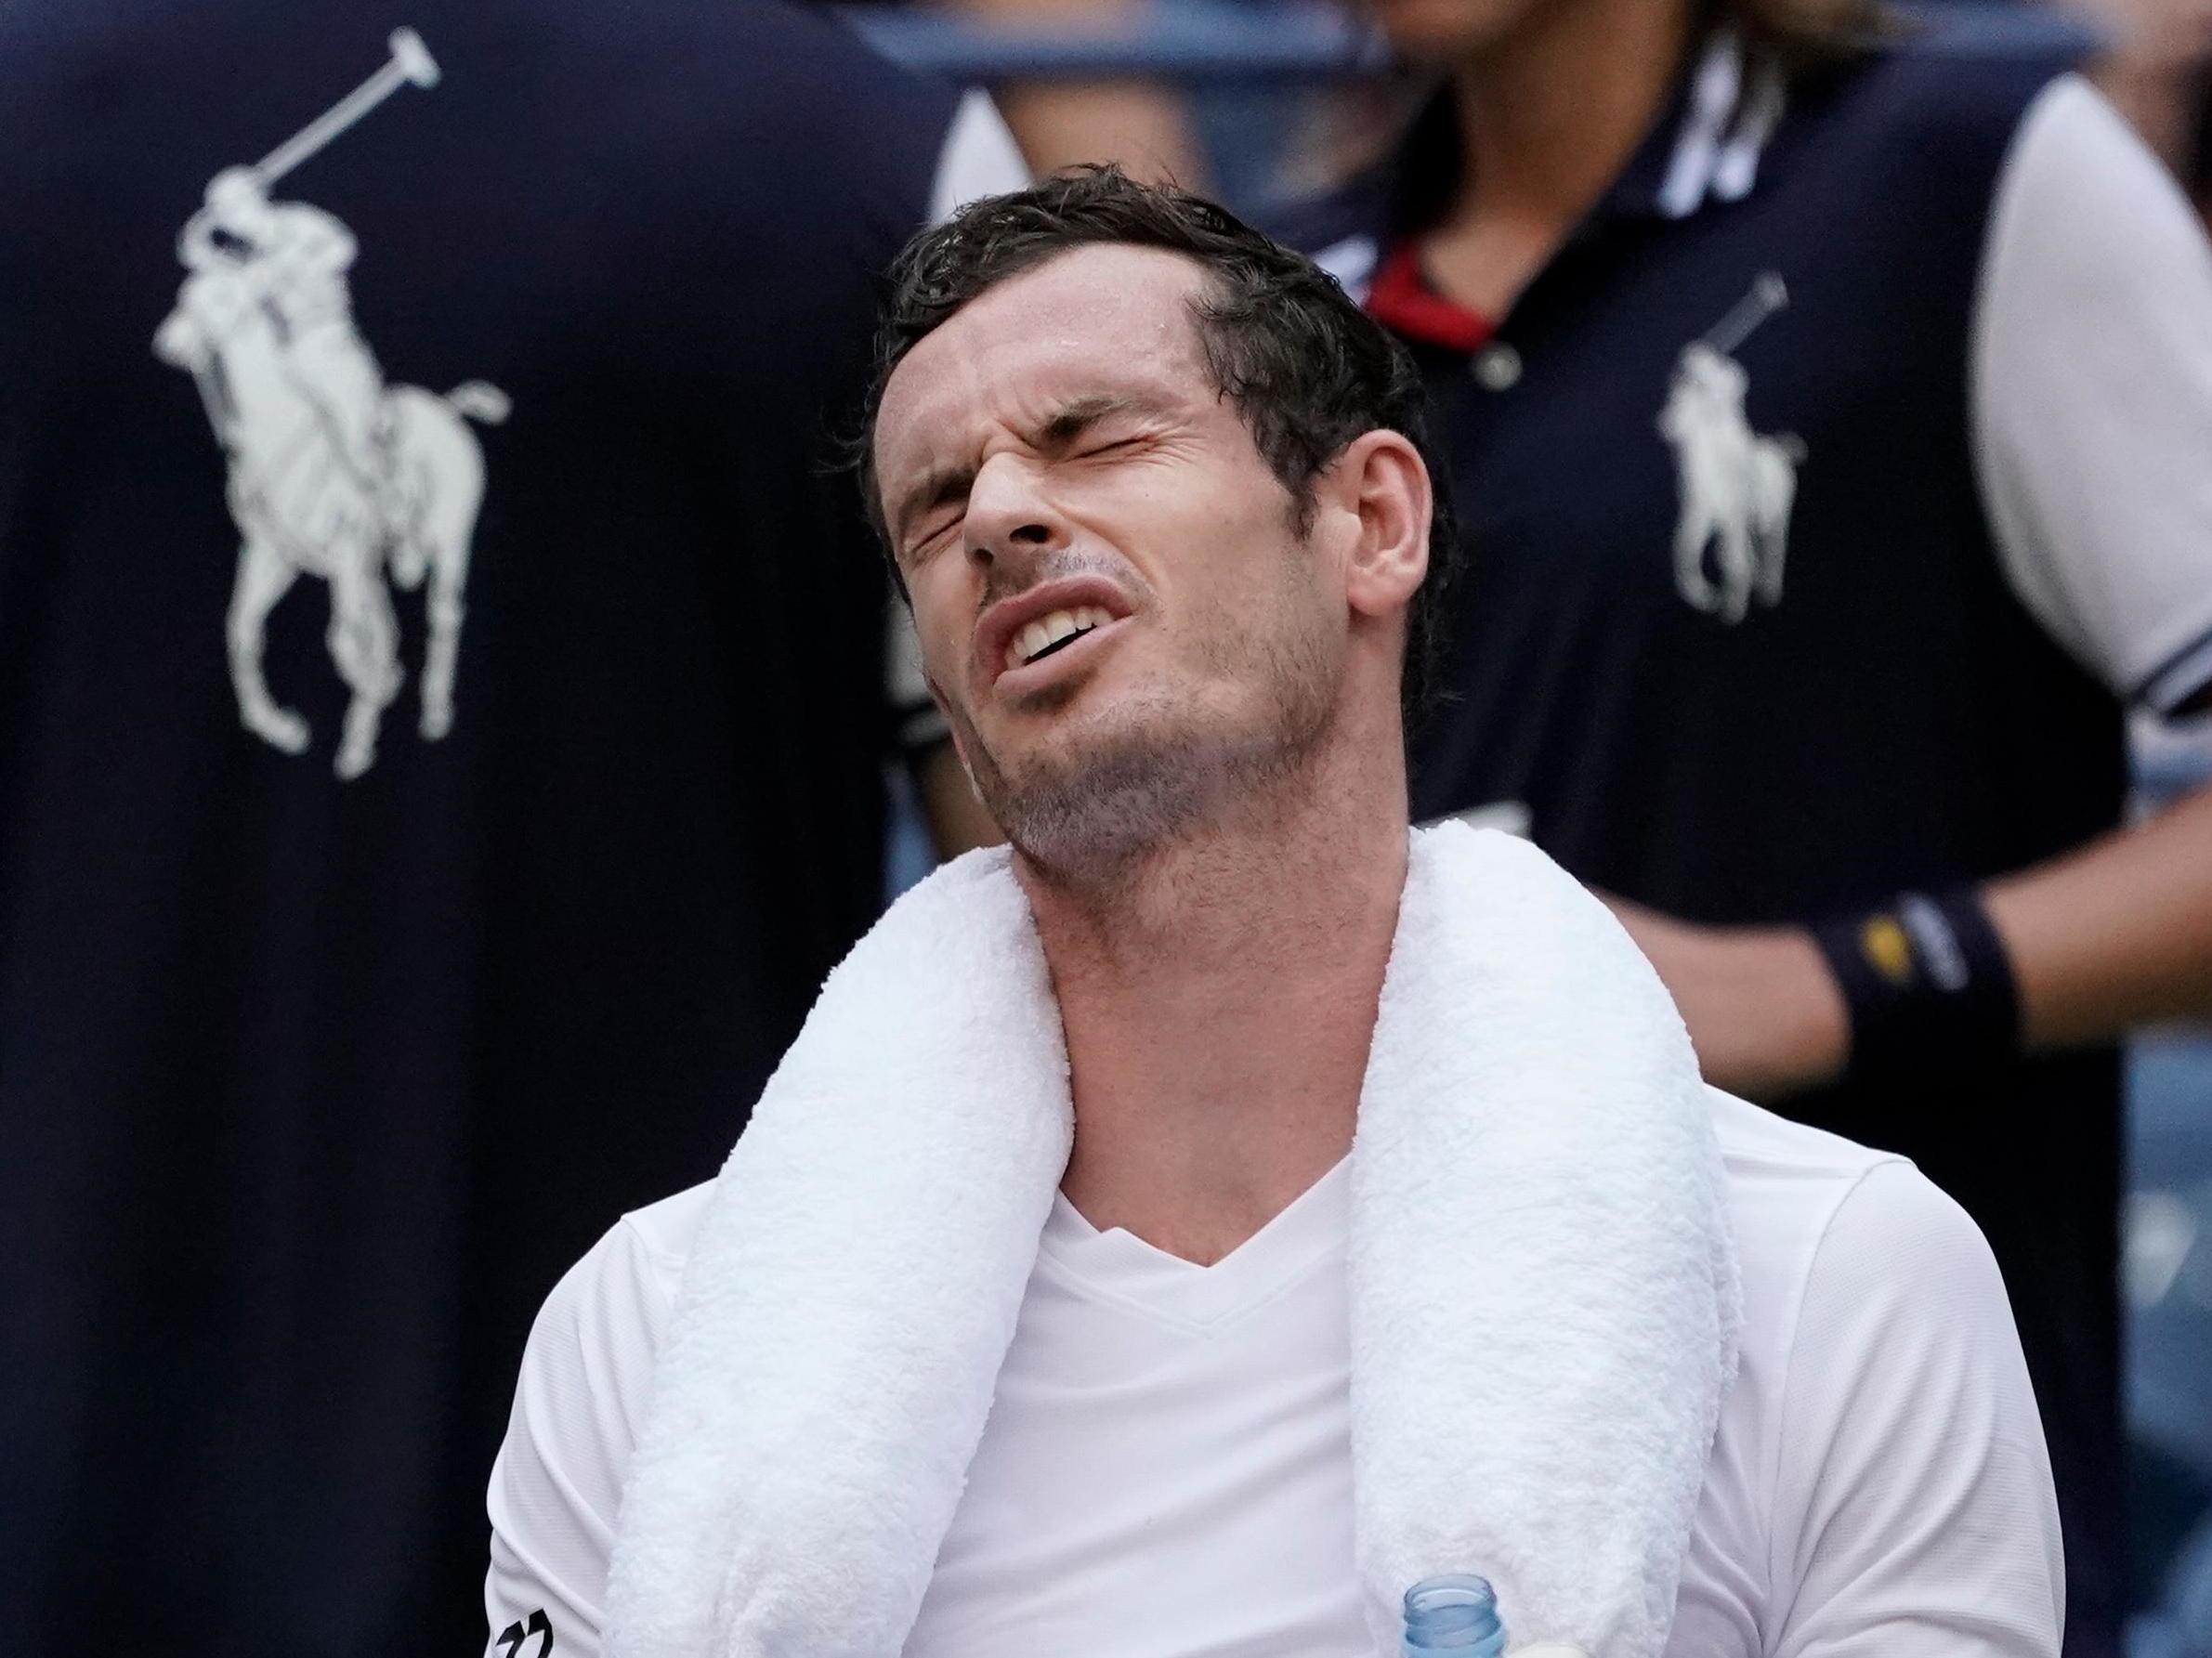 Andy Murray's season is prematurely over